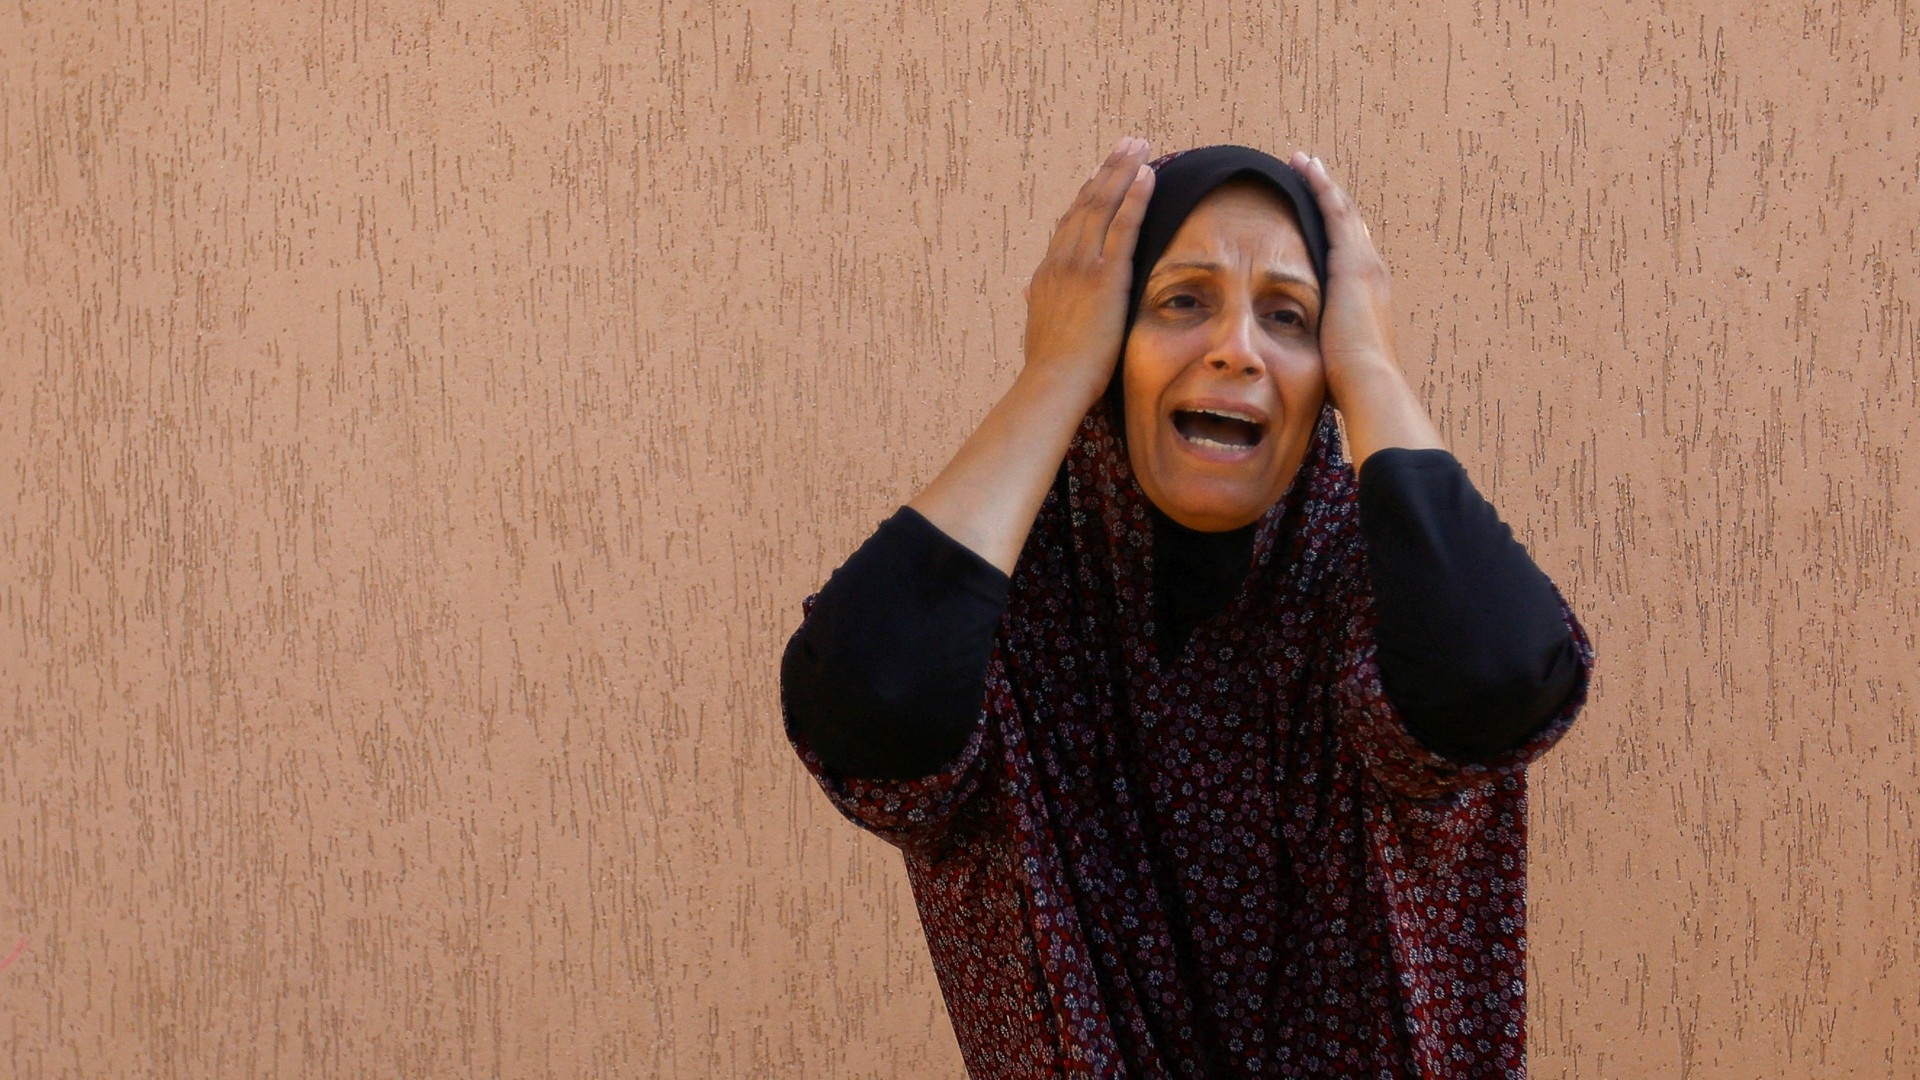 A Palestinian woman reacts in the aftermath of Israeli strikes, in Khan Younis in the southern Gaza Strip, 14 October (Reuters)